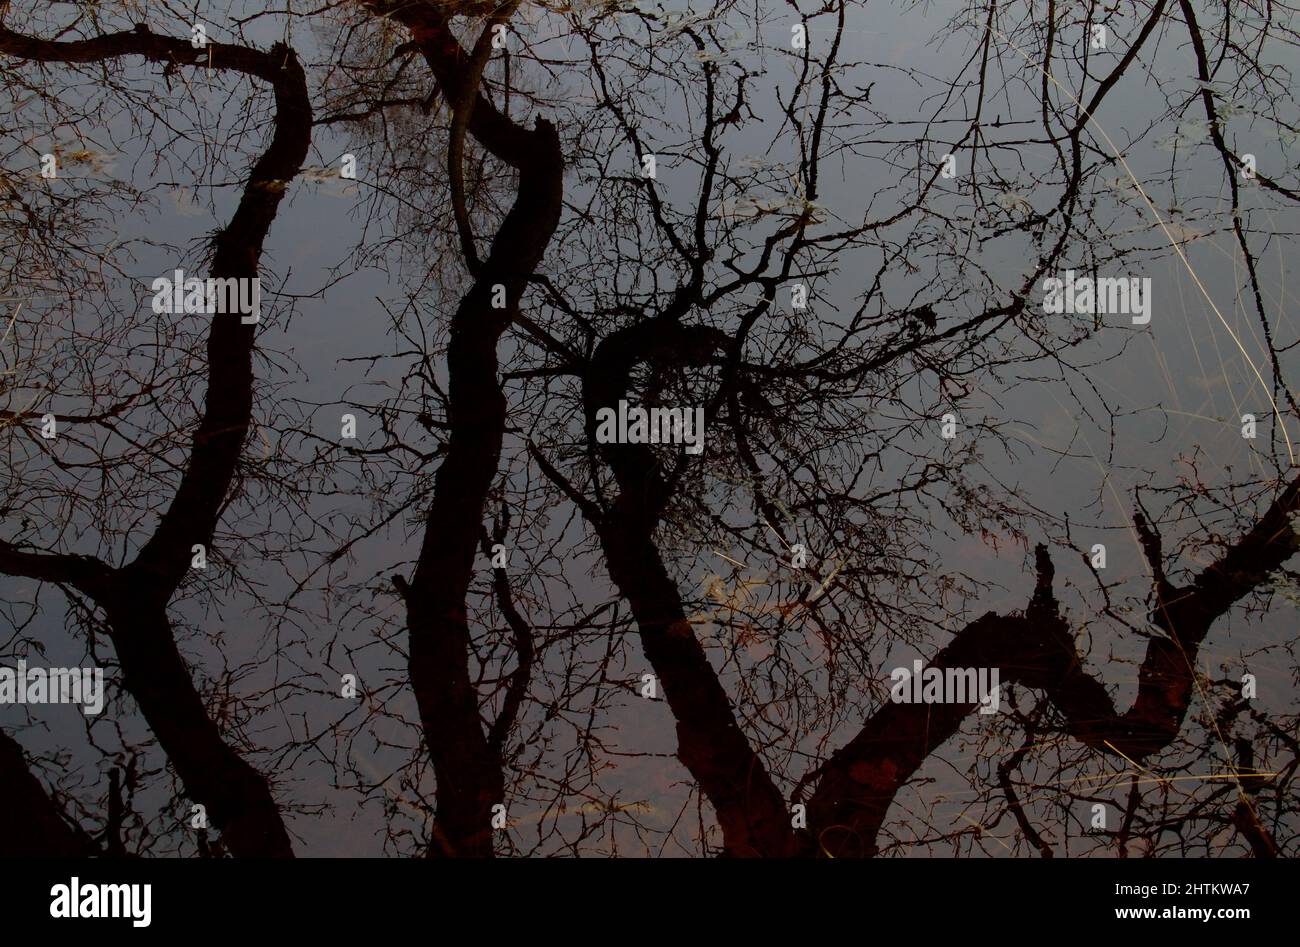 Turtuous branches of an old Oak tree reflected in dark water Stock Photo